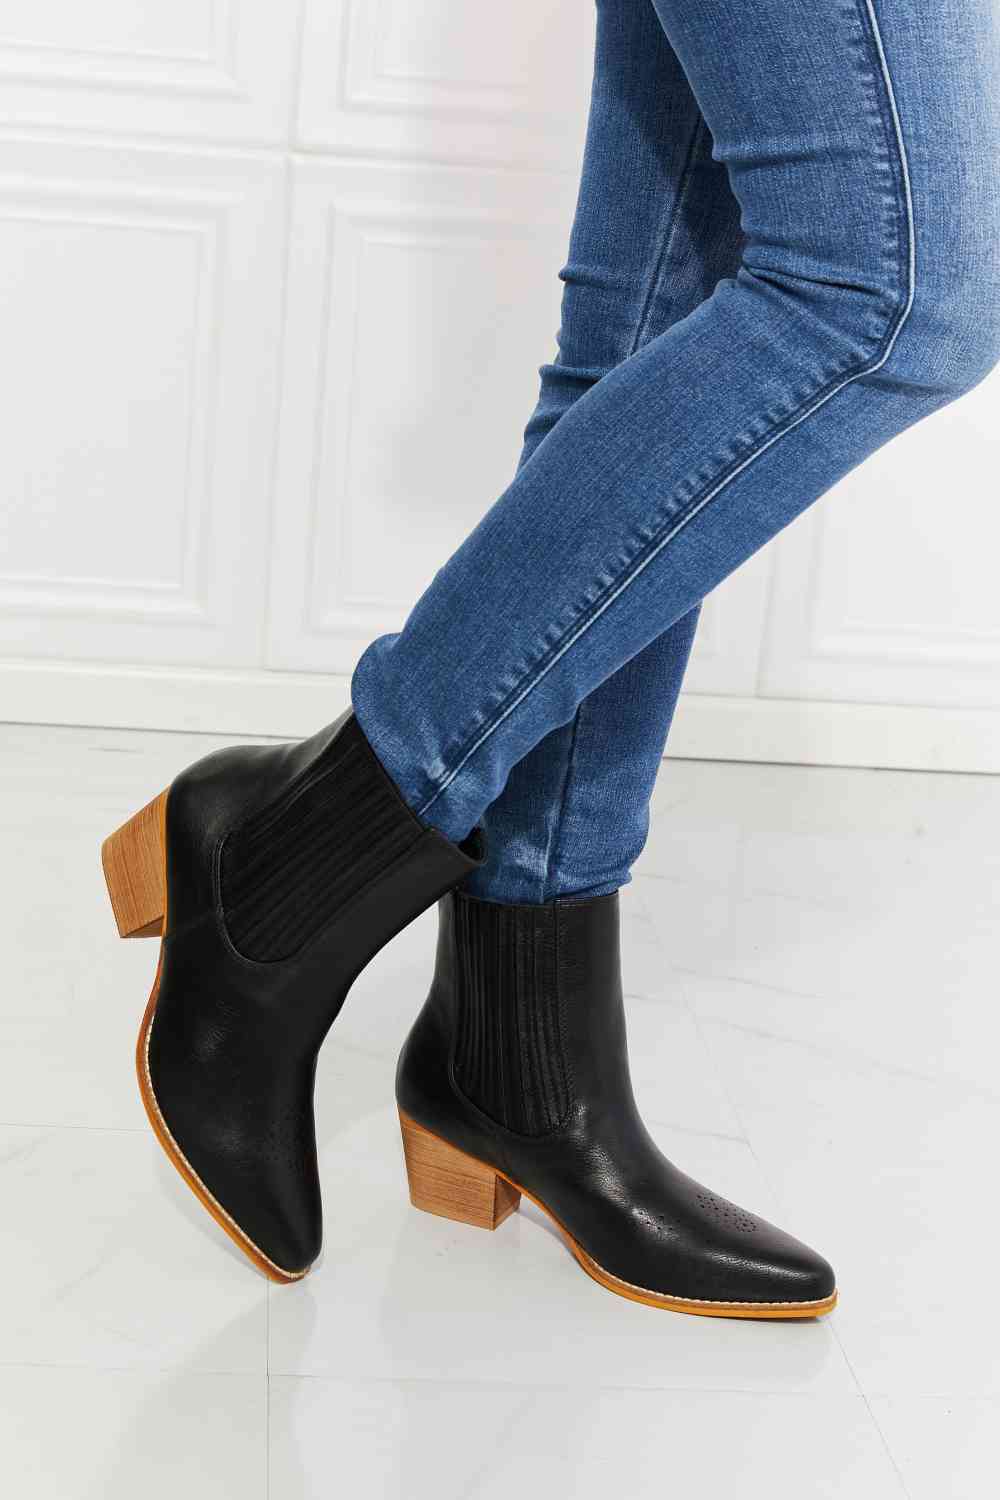 Love the Journey Stacked Heel Chelsea Boot in Black - Black / 6 - Accessories - Shoes - 1 - 2024